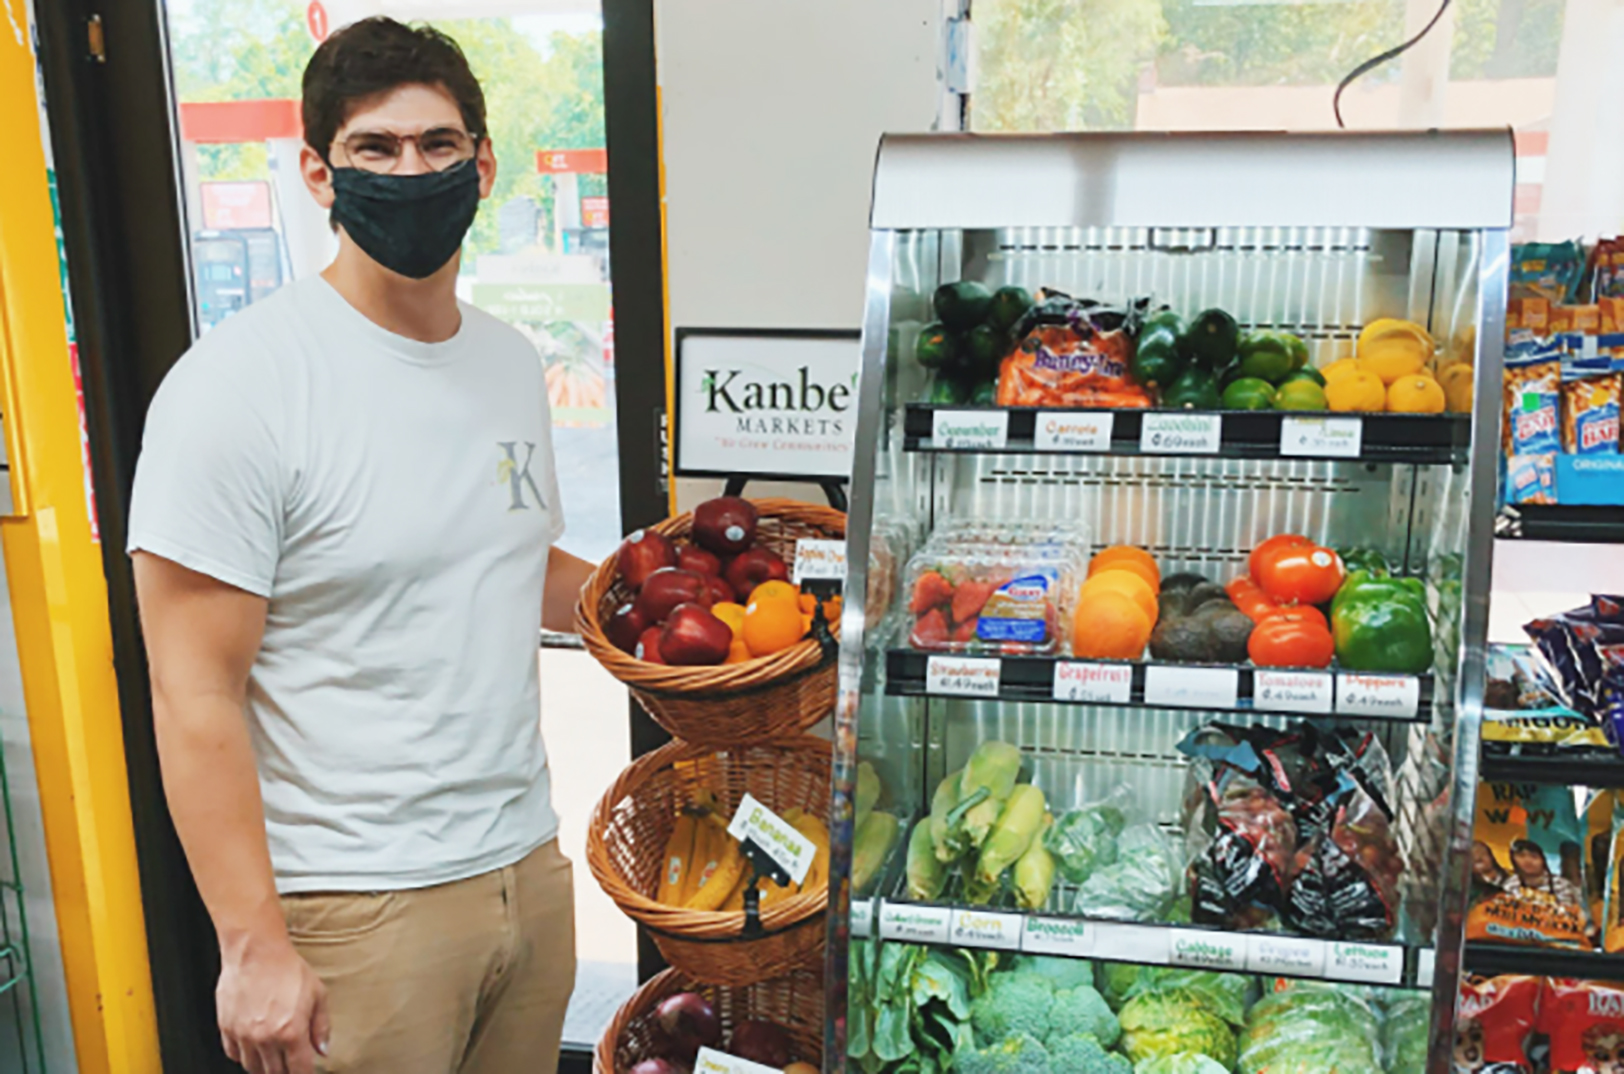 Kanbe’s Markets sees massive growth, plans expansion beyond KC as food insecurity surges